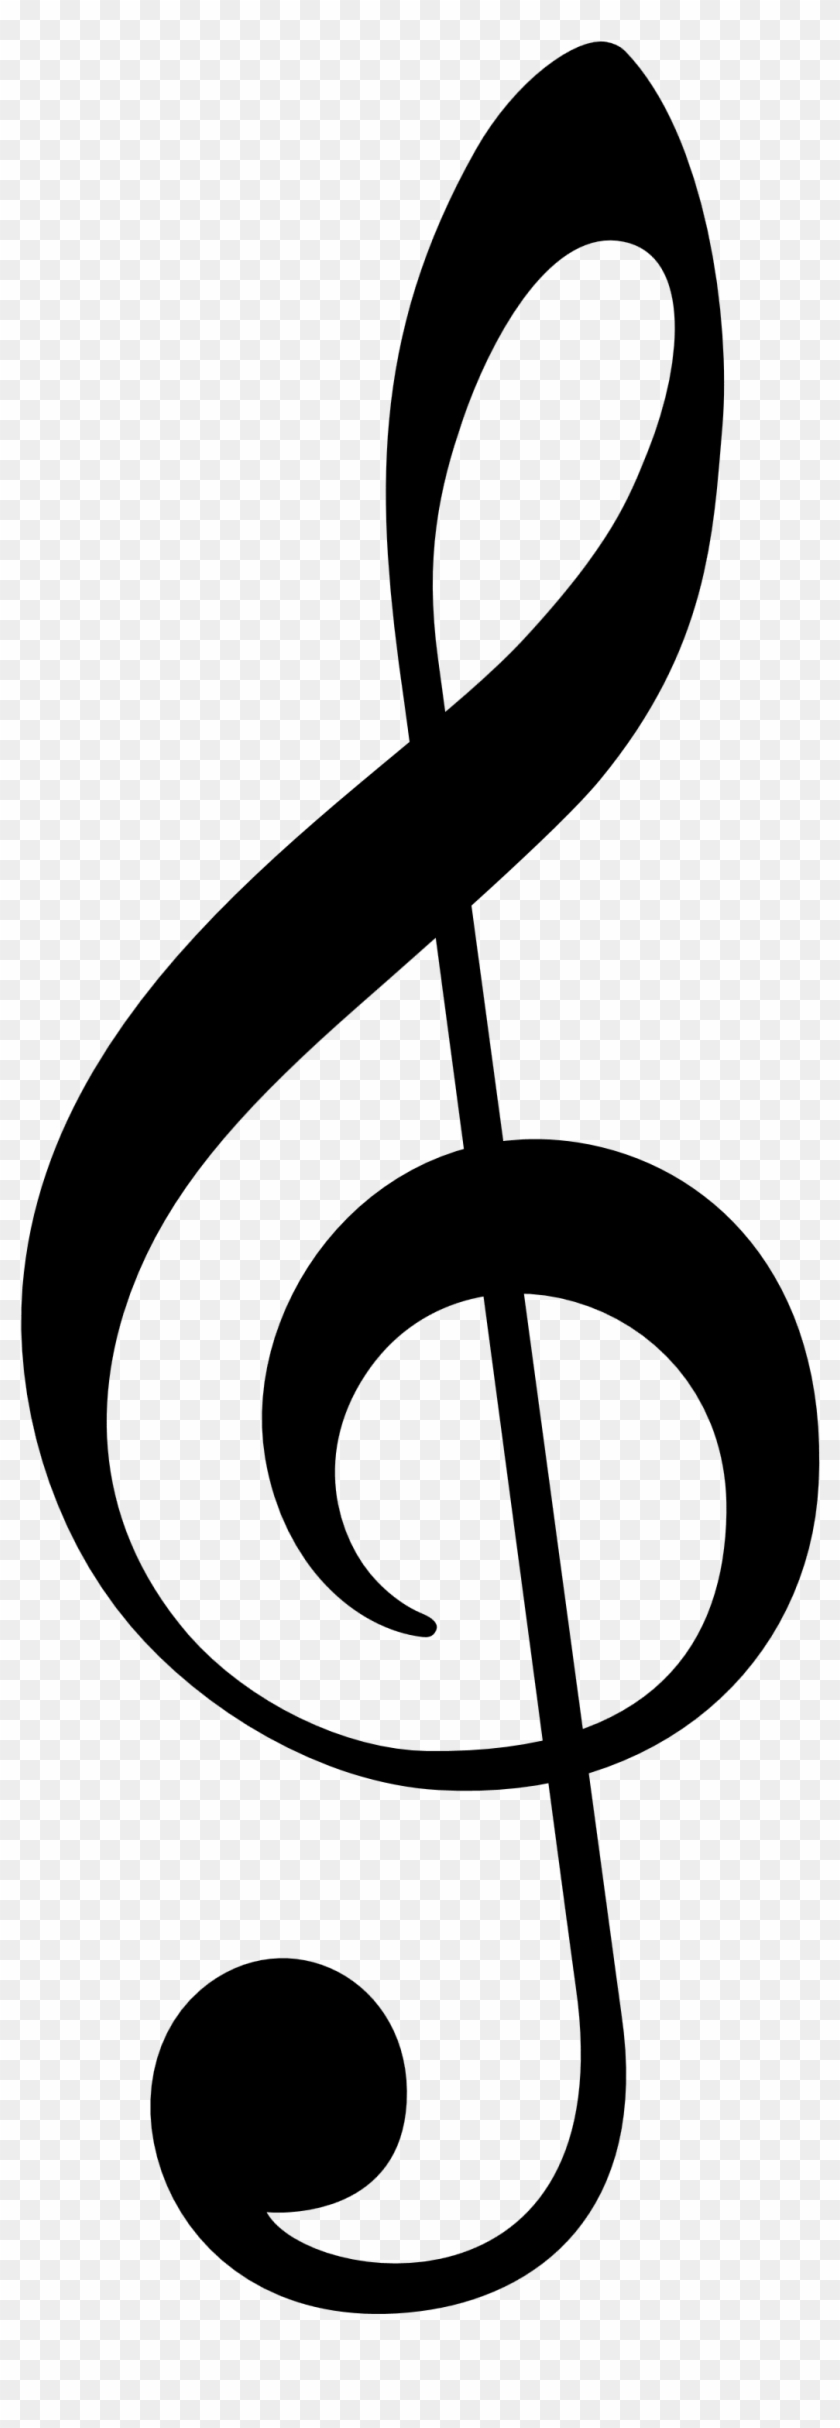 Musical Note Musical Notation Musical Theatre - Treble Clef #1180182